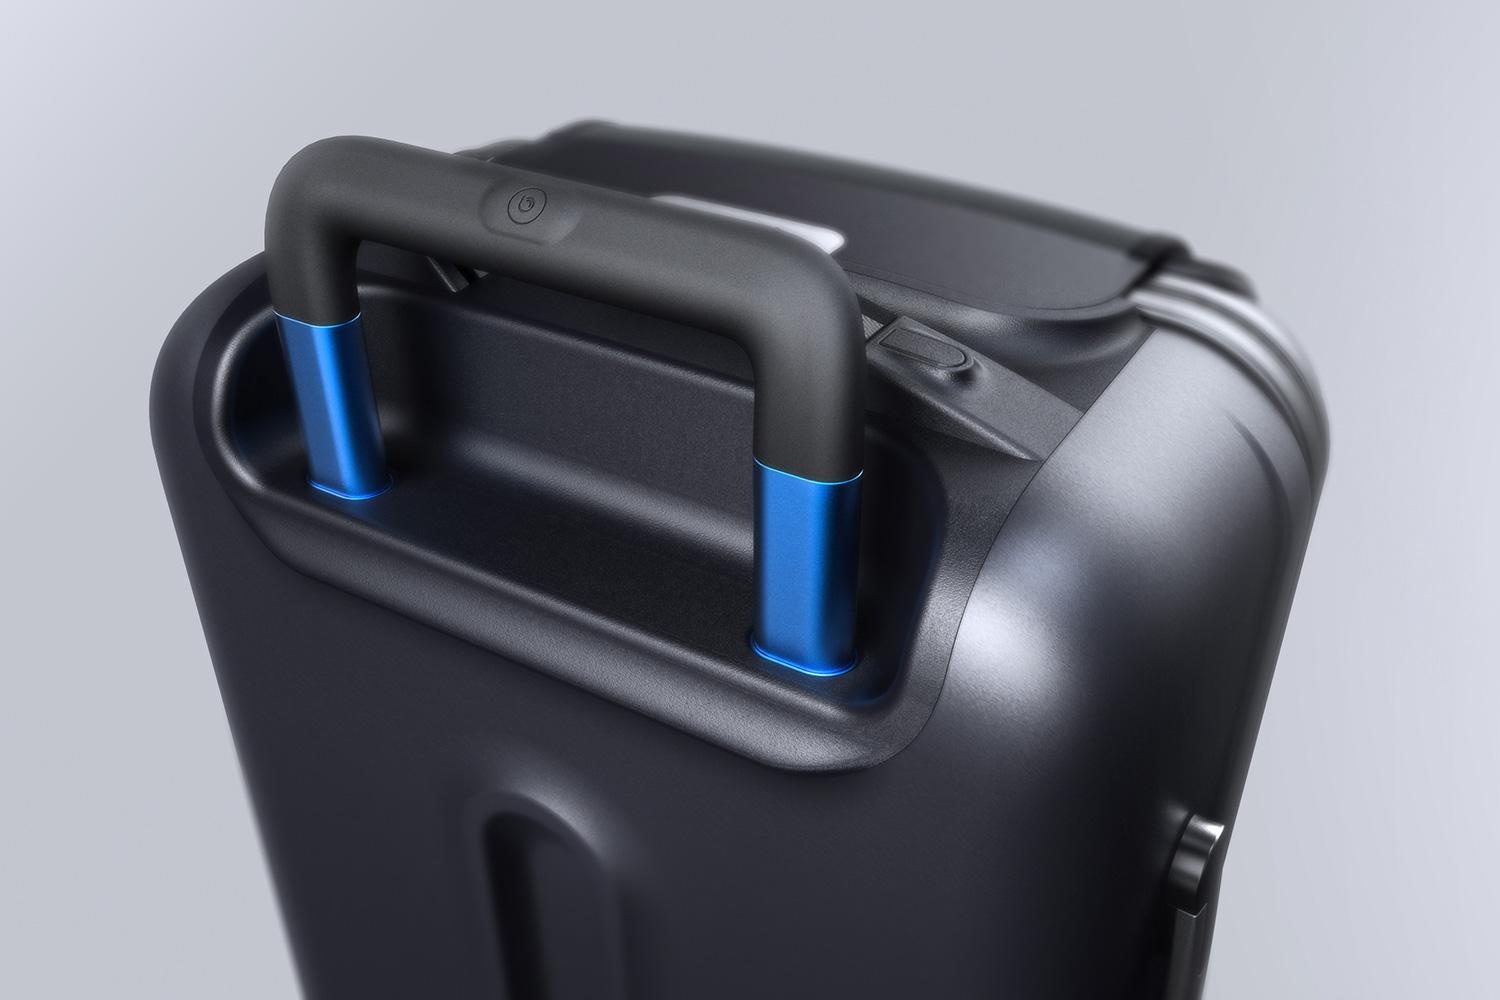 bluesmart-connected-suitcase-handle-angle-1500×1000